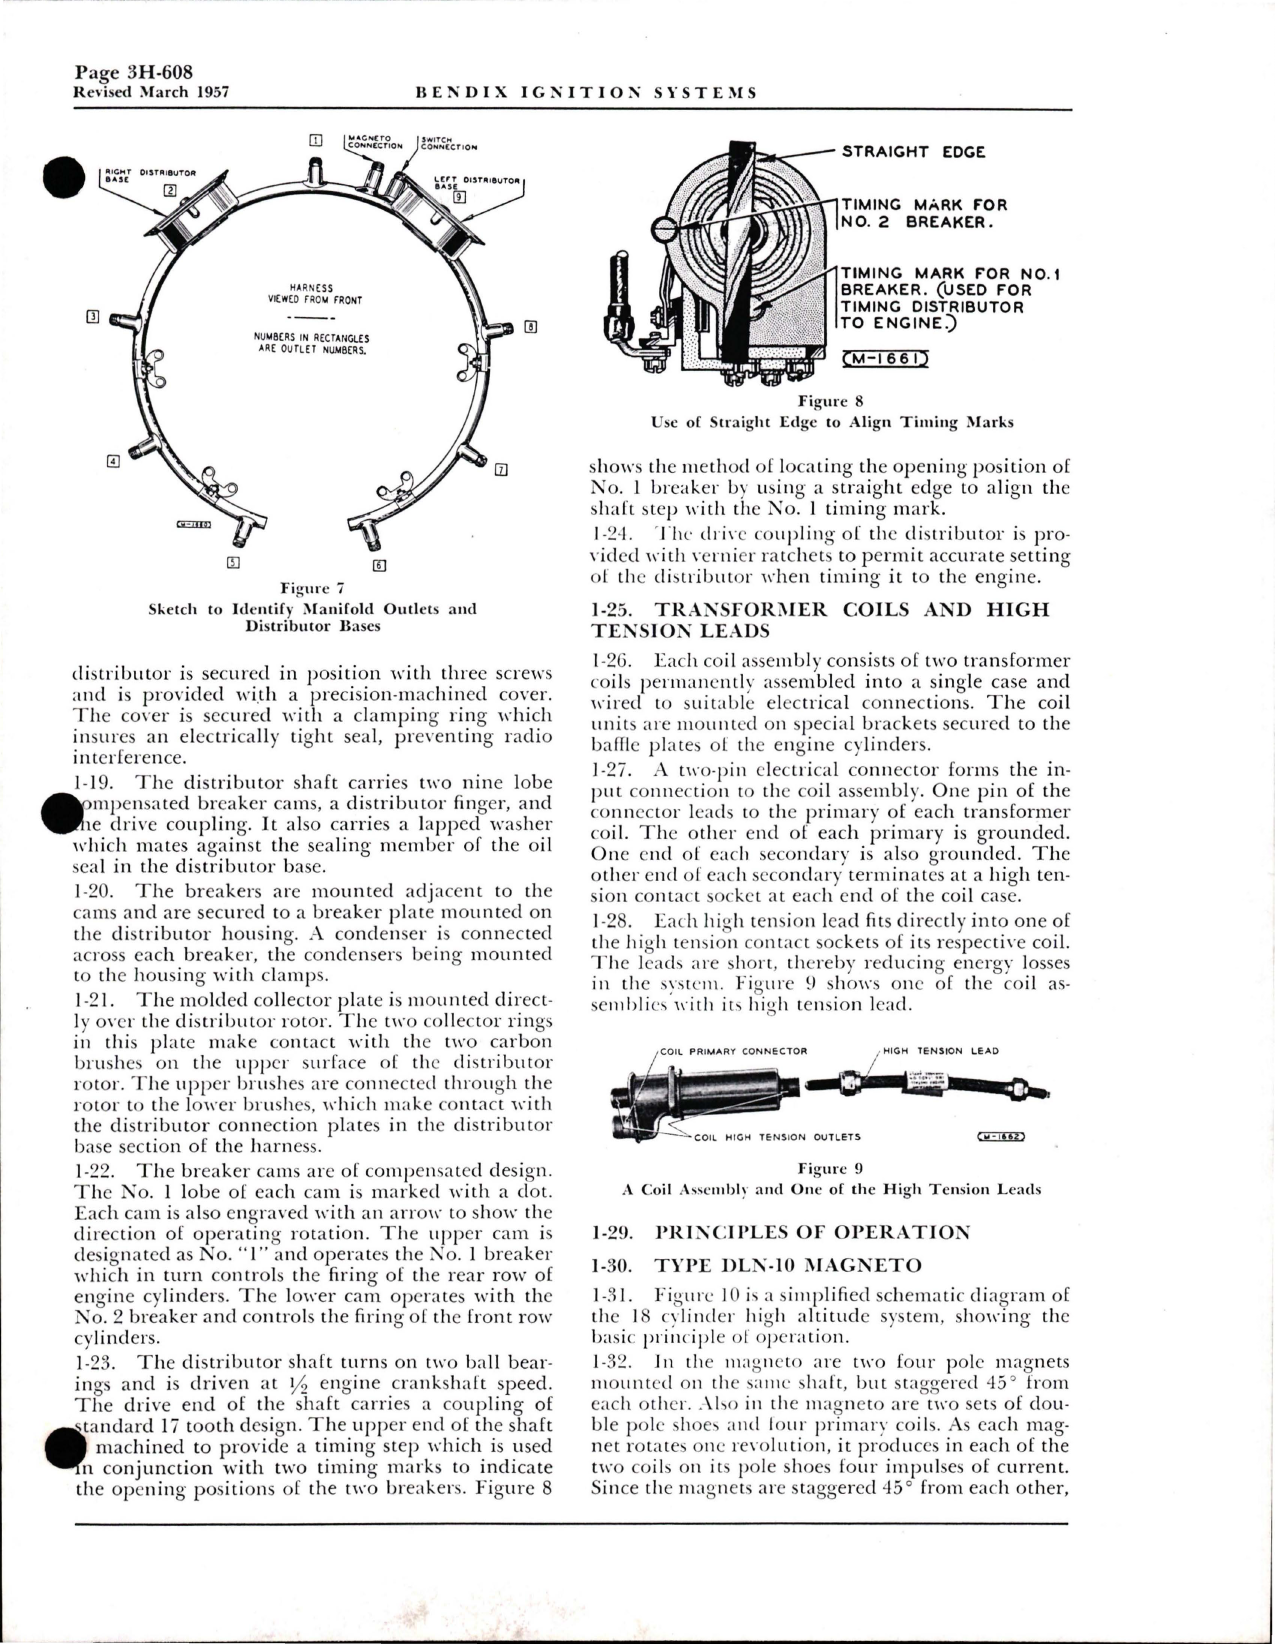 Sample page 7 from AirCorps Library document: Overhaul Instructions for Low Tension - High Altitude Ignition System